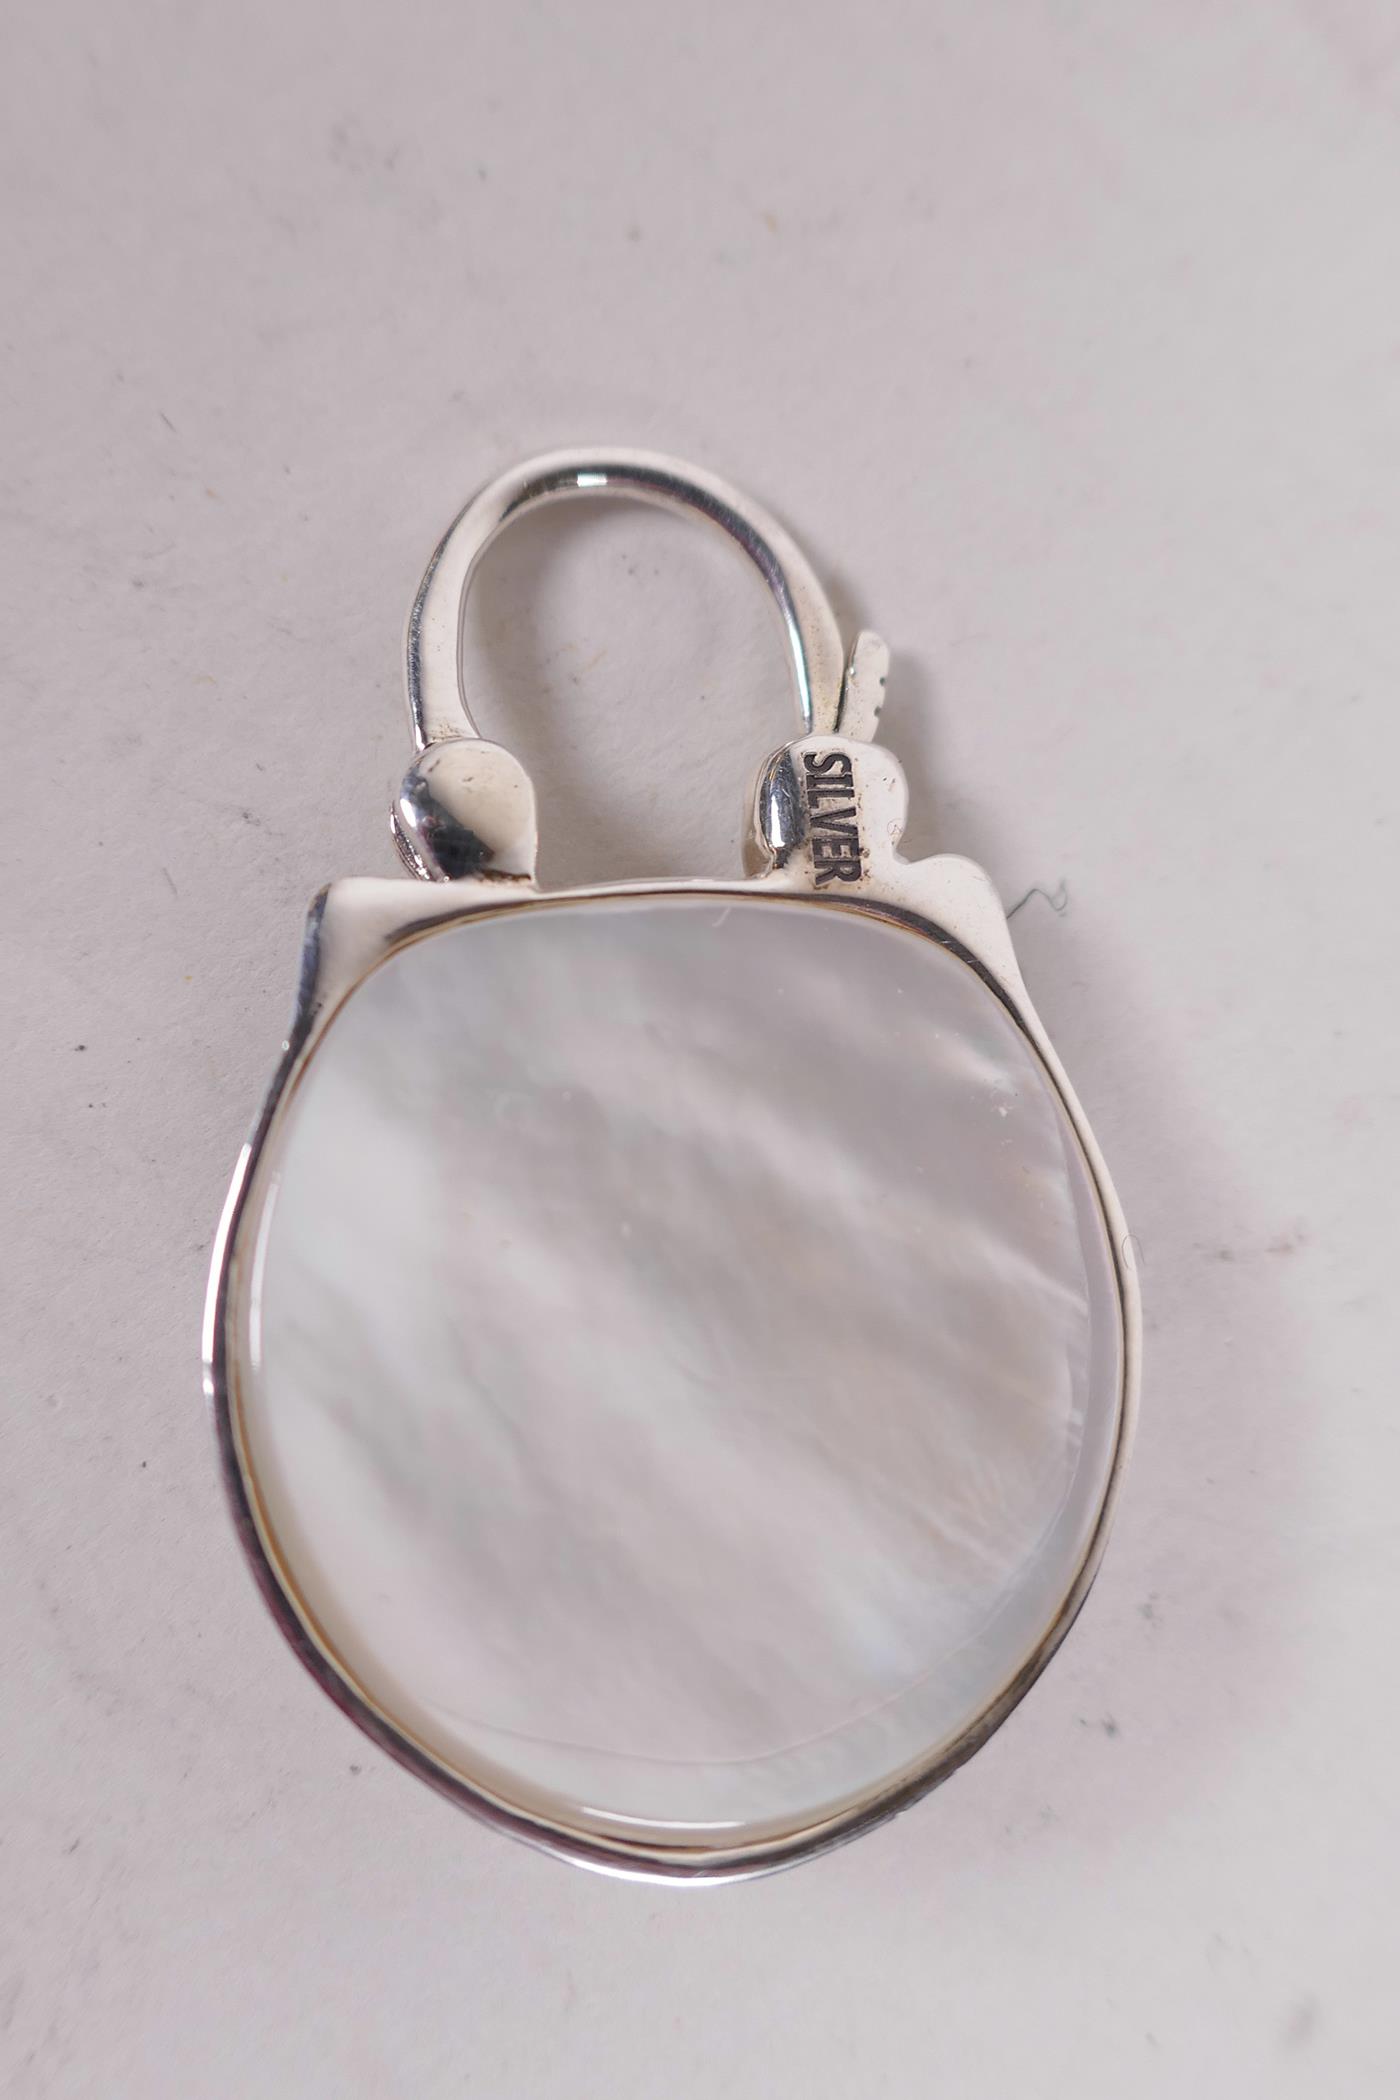 A silver and mother of pearl decorative padlock formed as an owl with beaded eyes, 1¼" x 1" - Image 2 of 2